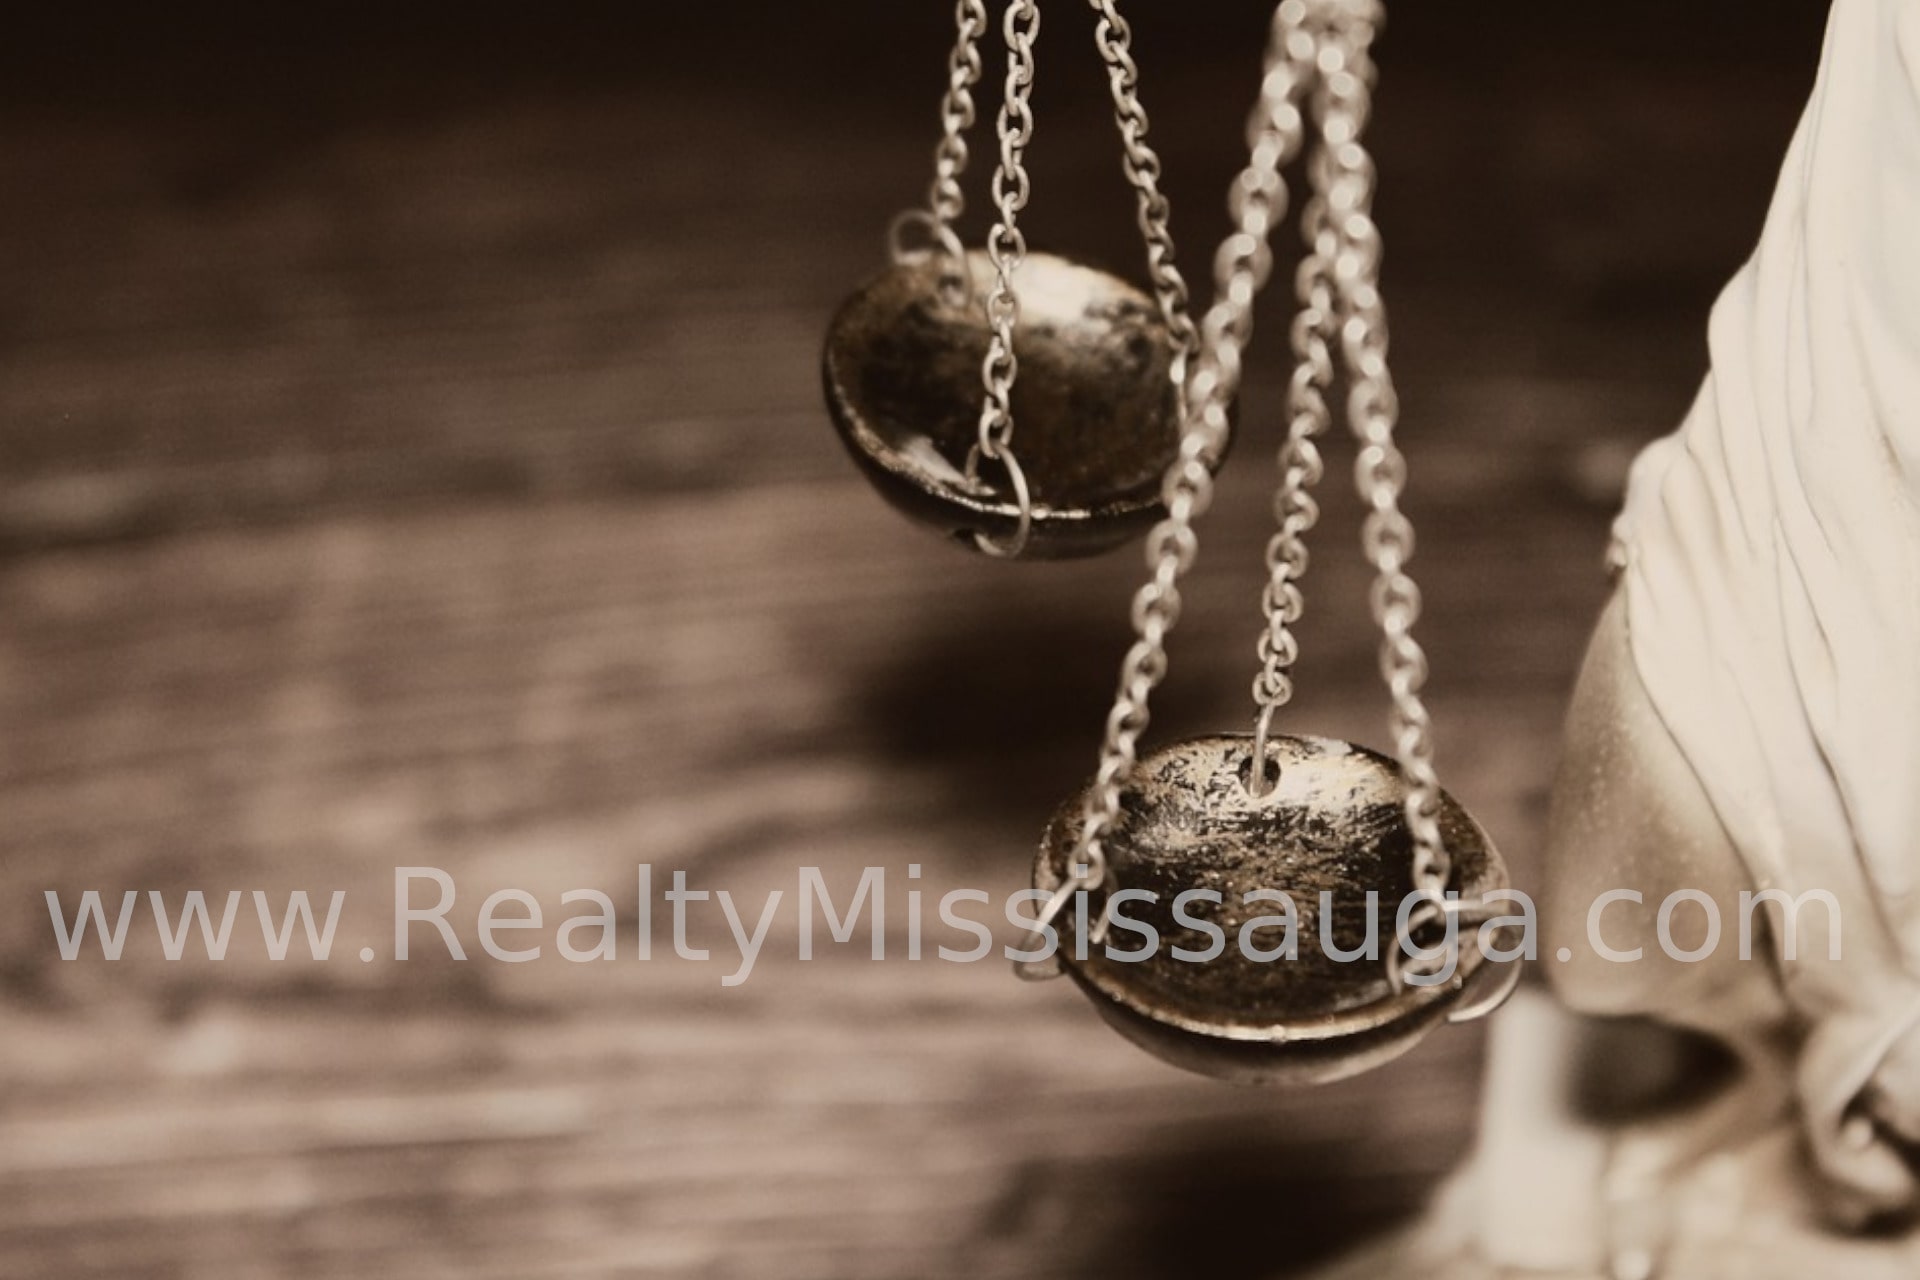 You are currently viewing Offer Legal Services in the Real Estate Industry in Mississauga